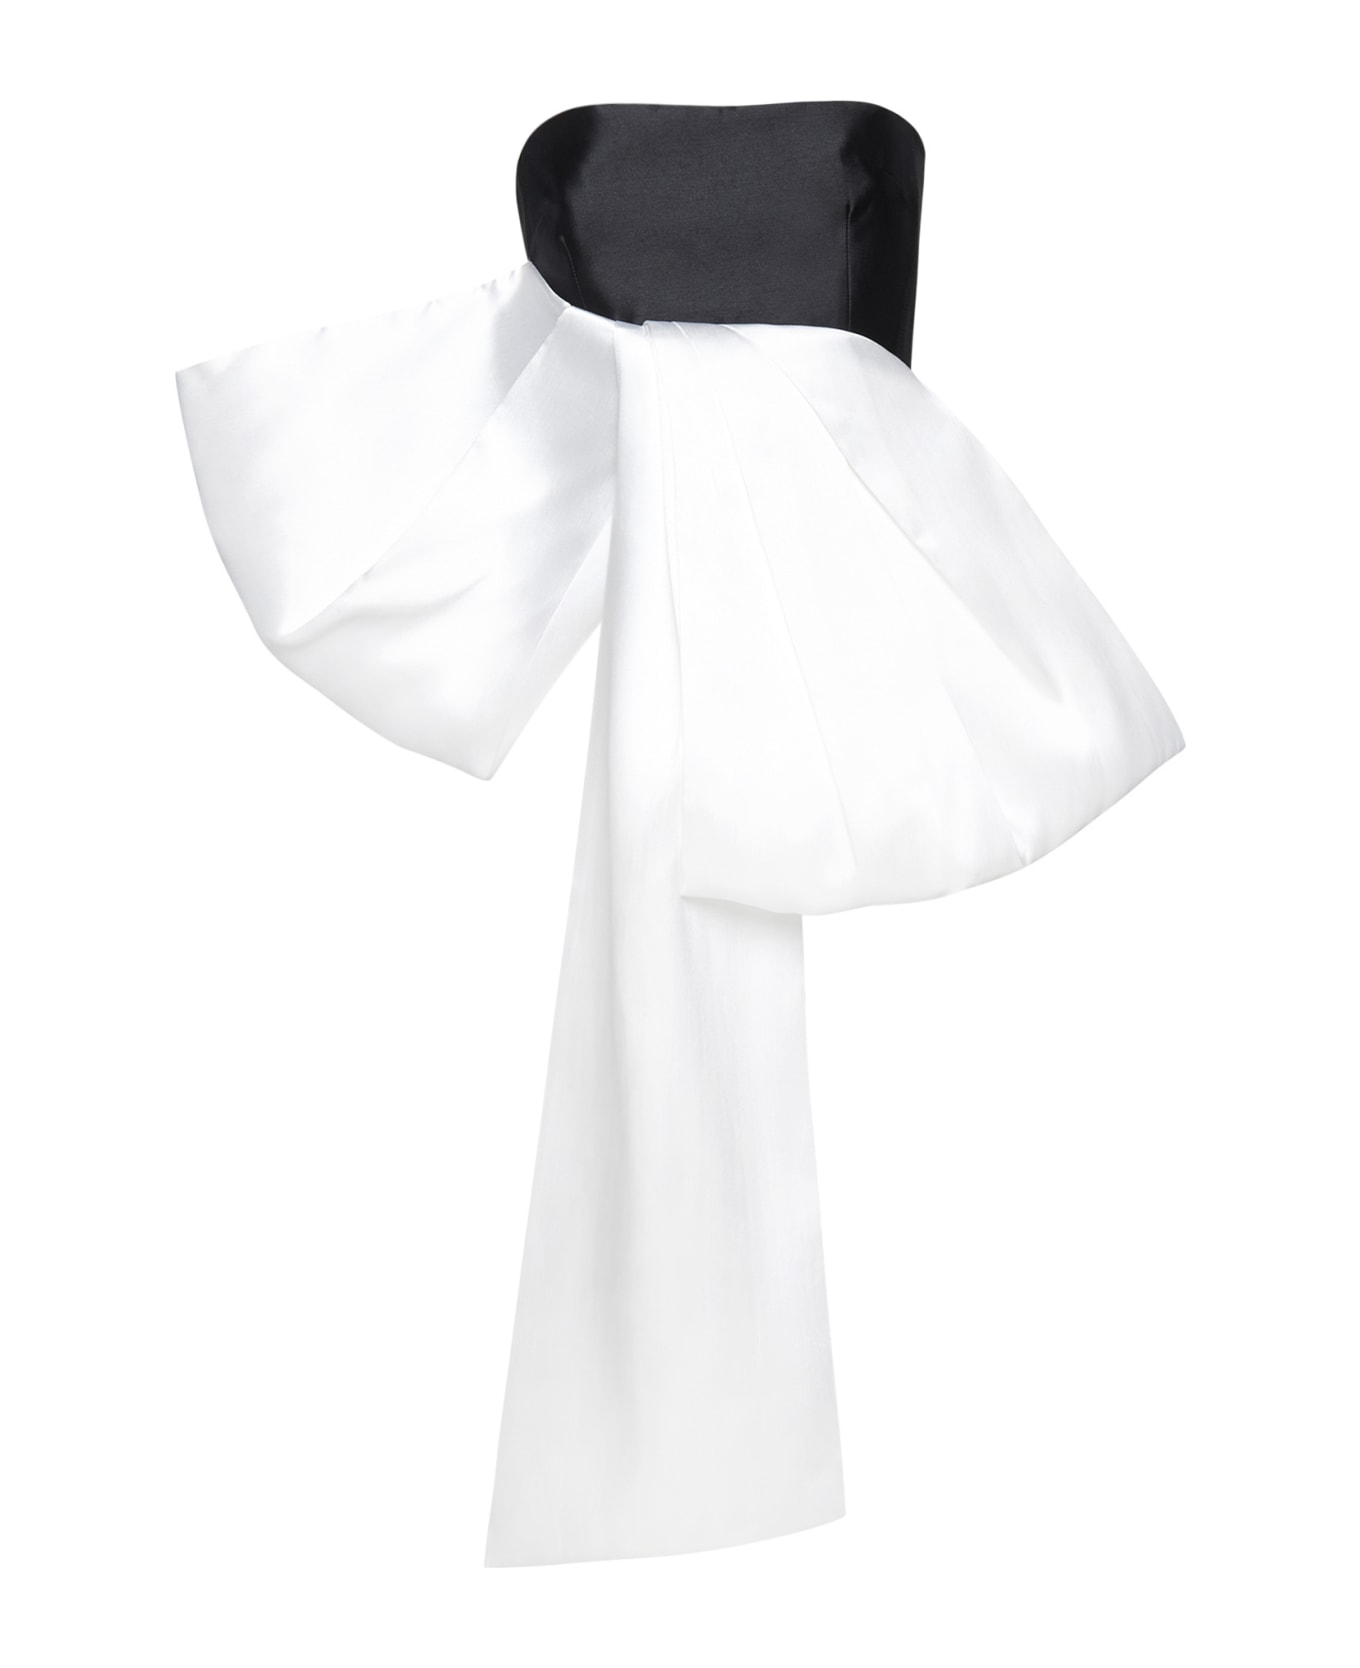 Solace London 'nadina' Black And White Top With Bow Detail In Silk Woman - Black/cream トップス